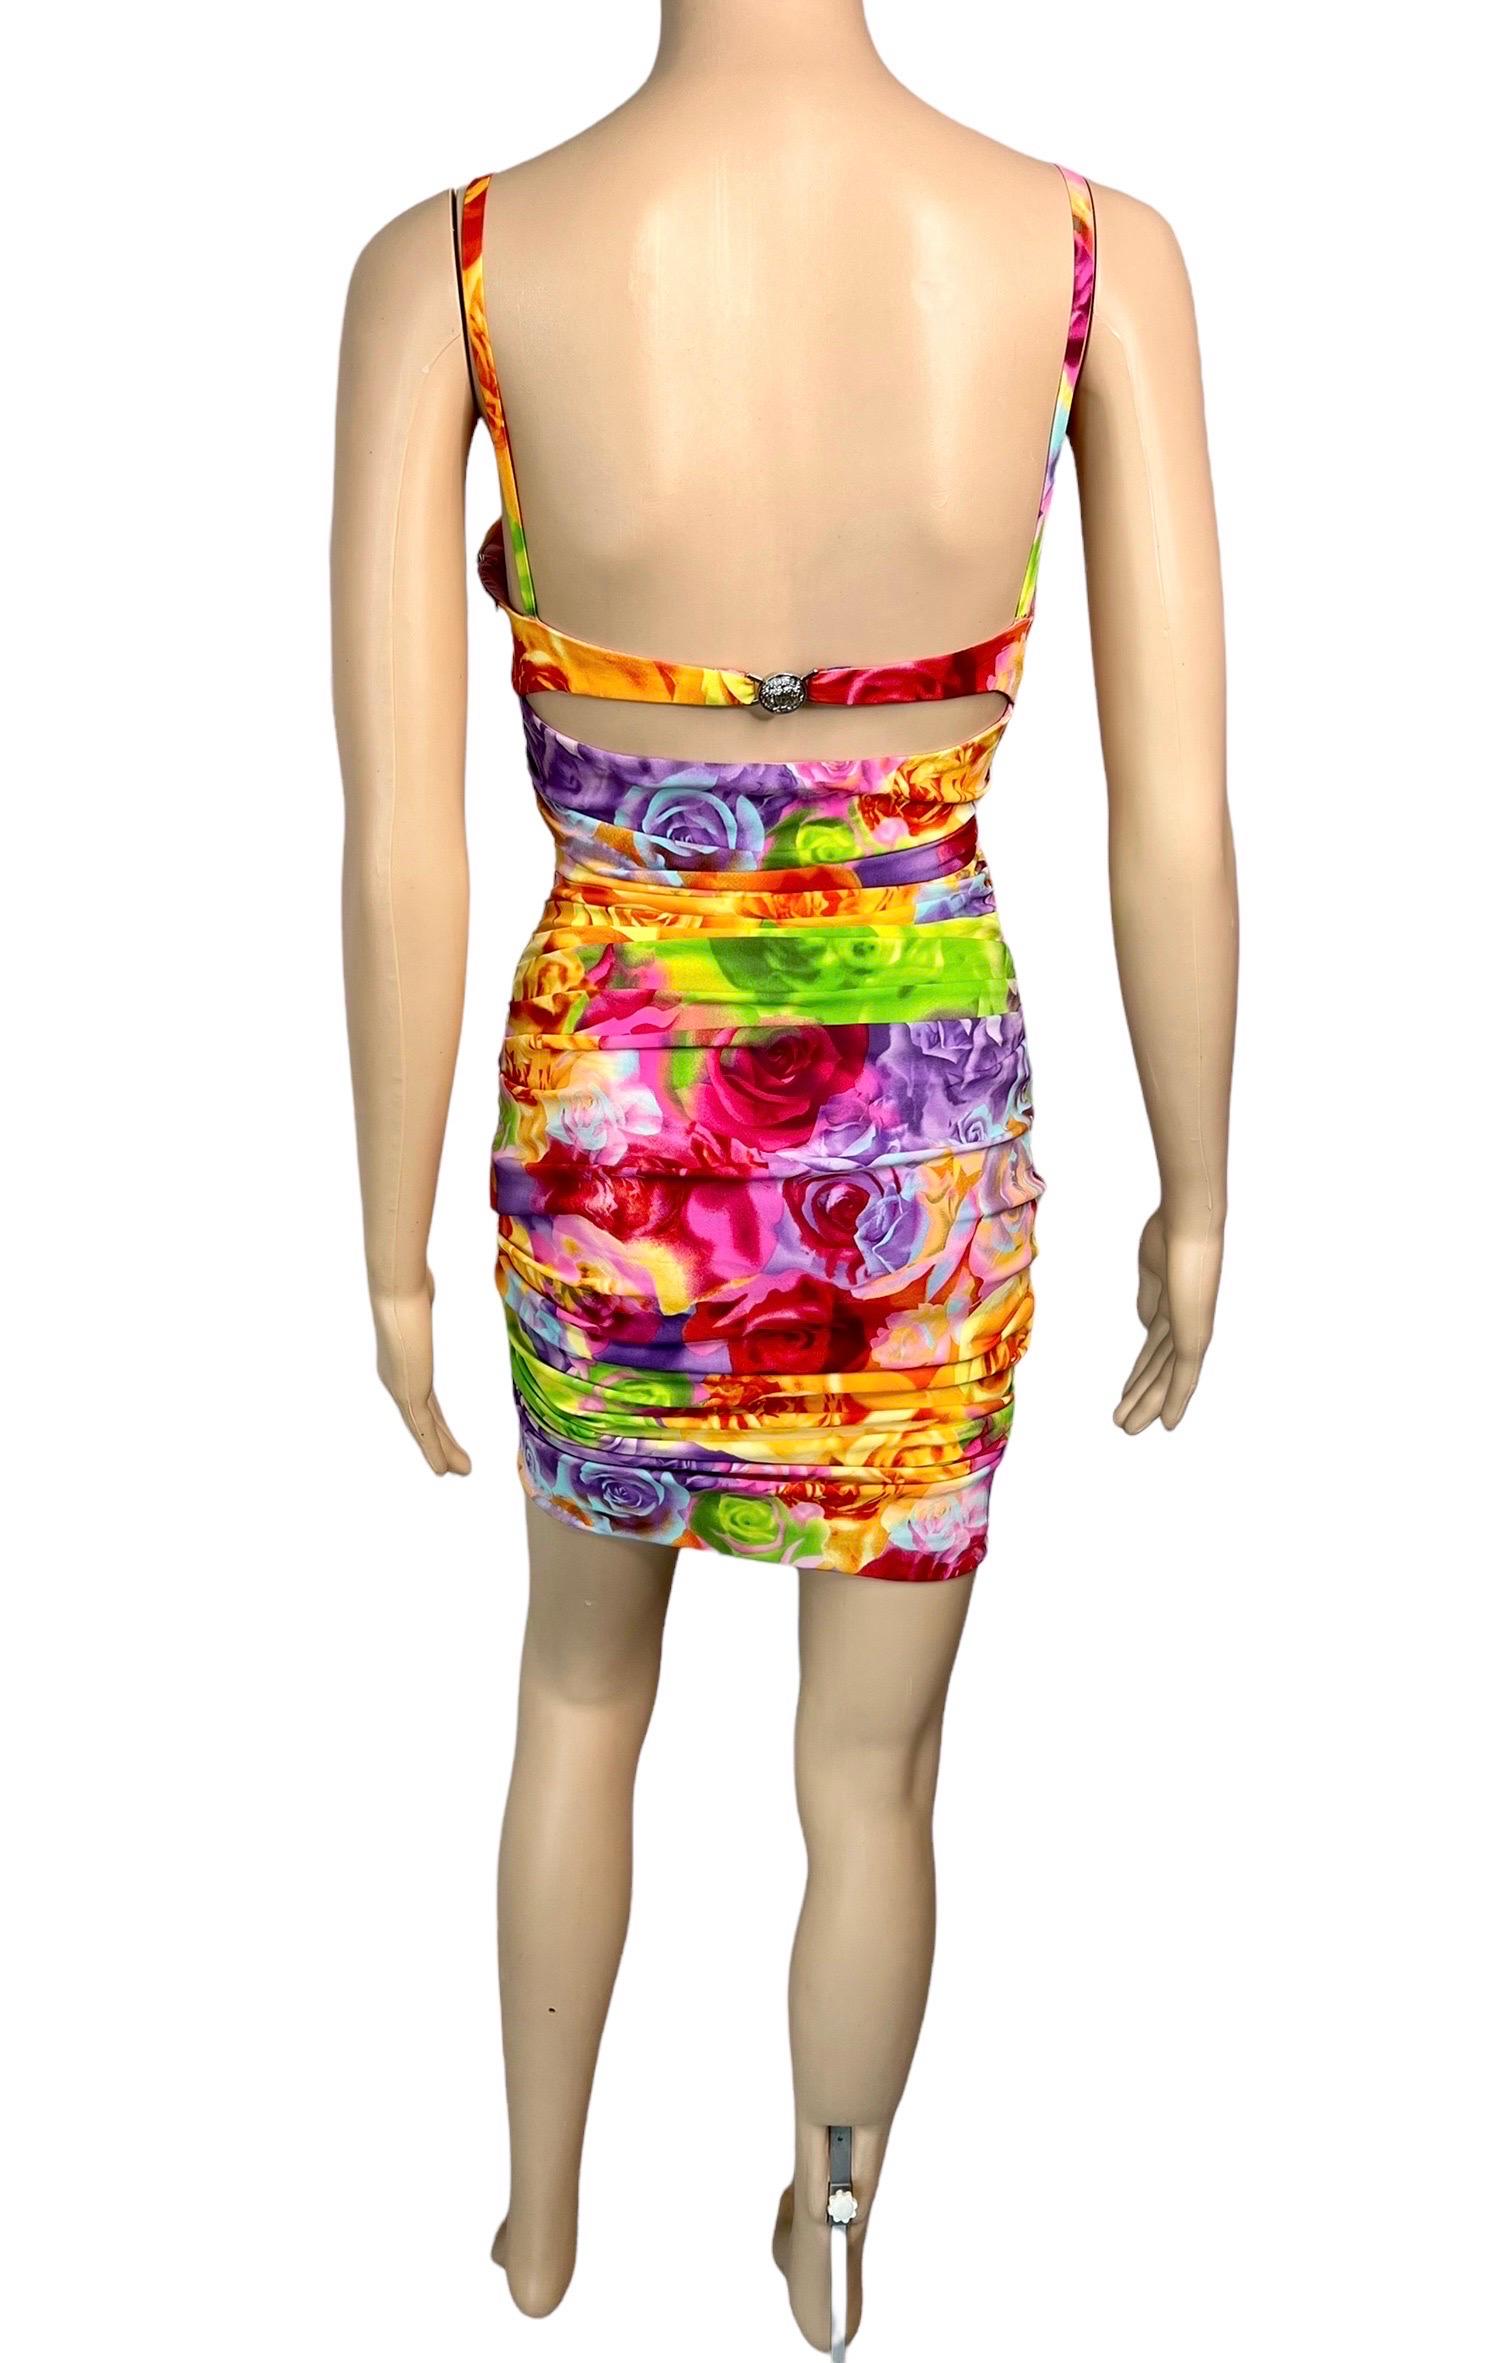 Versace S/S 2005 Bustier Bra Floral Print Bodycon Ruched Dress In Good Condition For Sale In Naples, FL